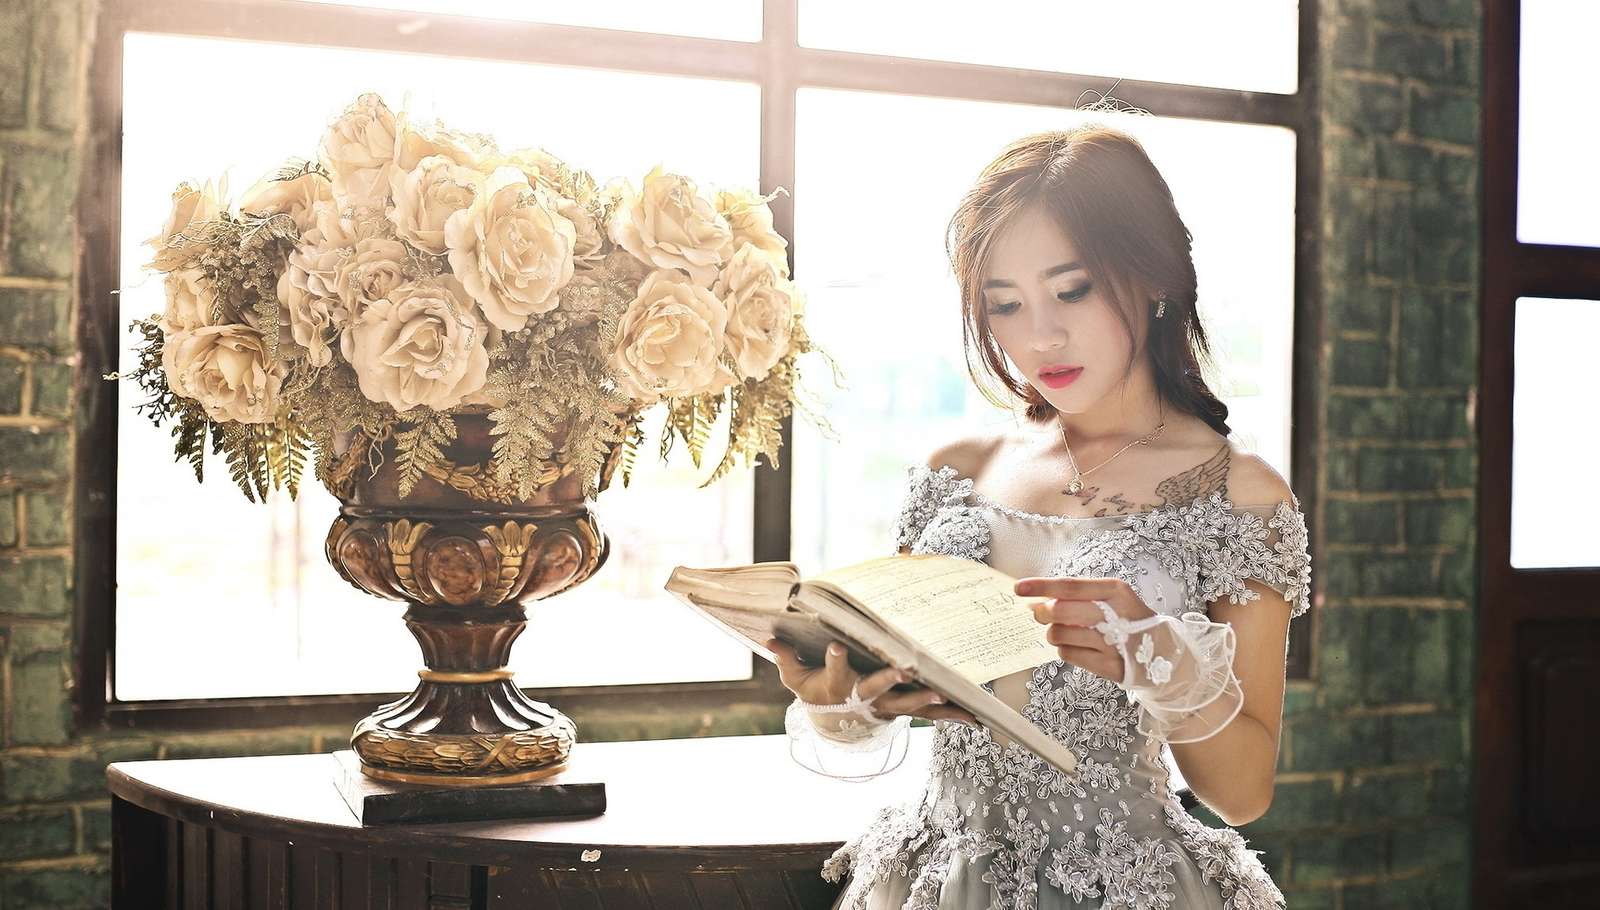 Woman with a book next to roses in a vase by the window jigsaw puzzle online